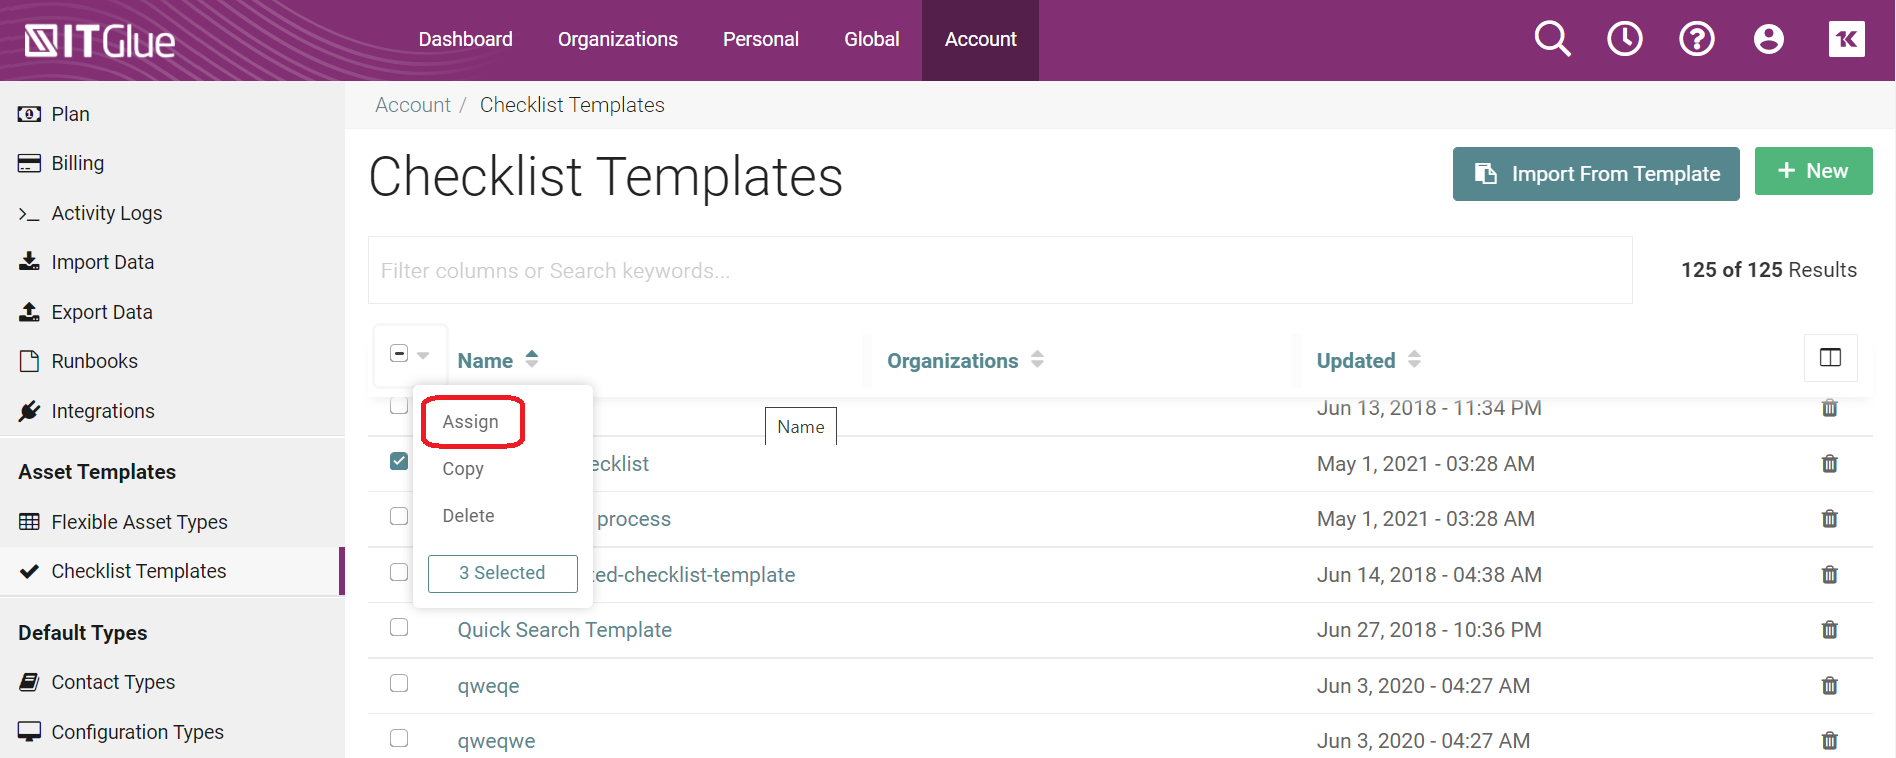 Assign_Checklist_Templates.png